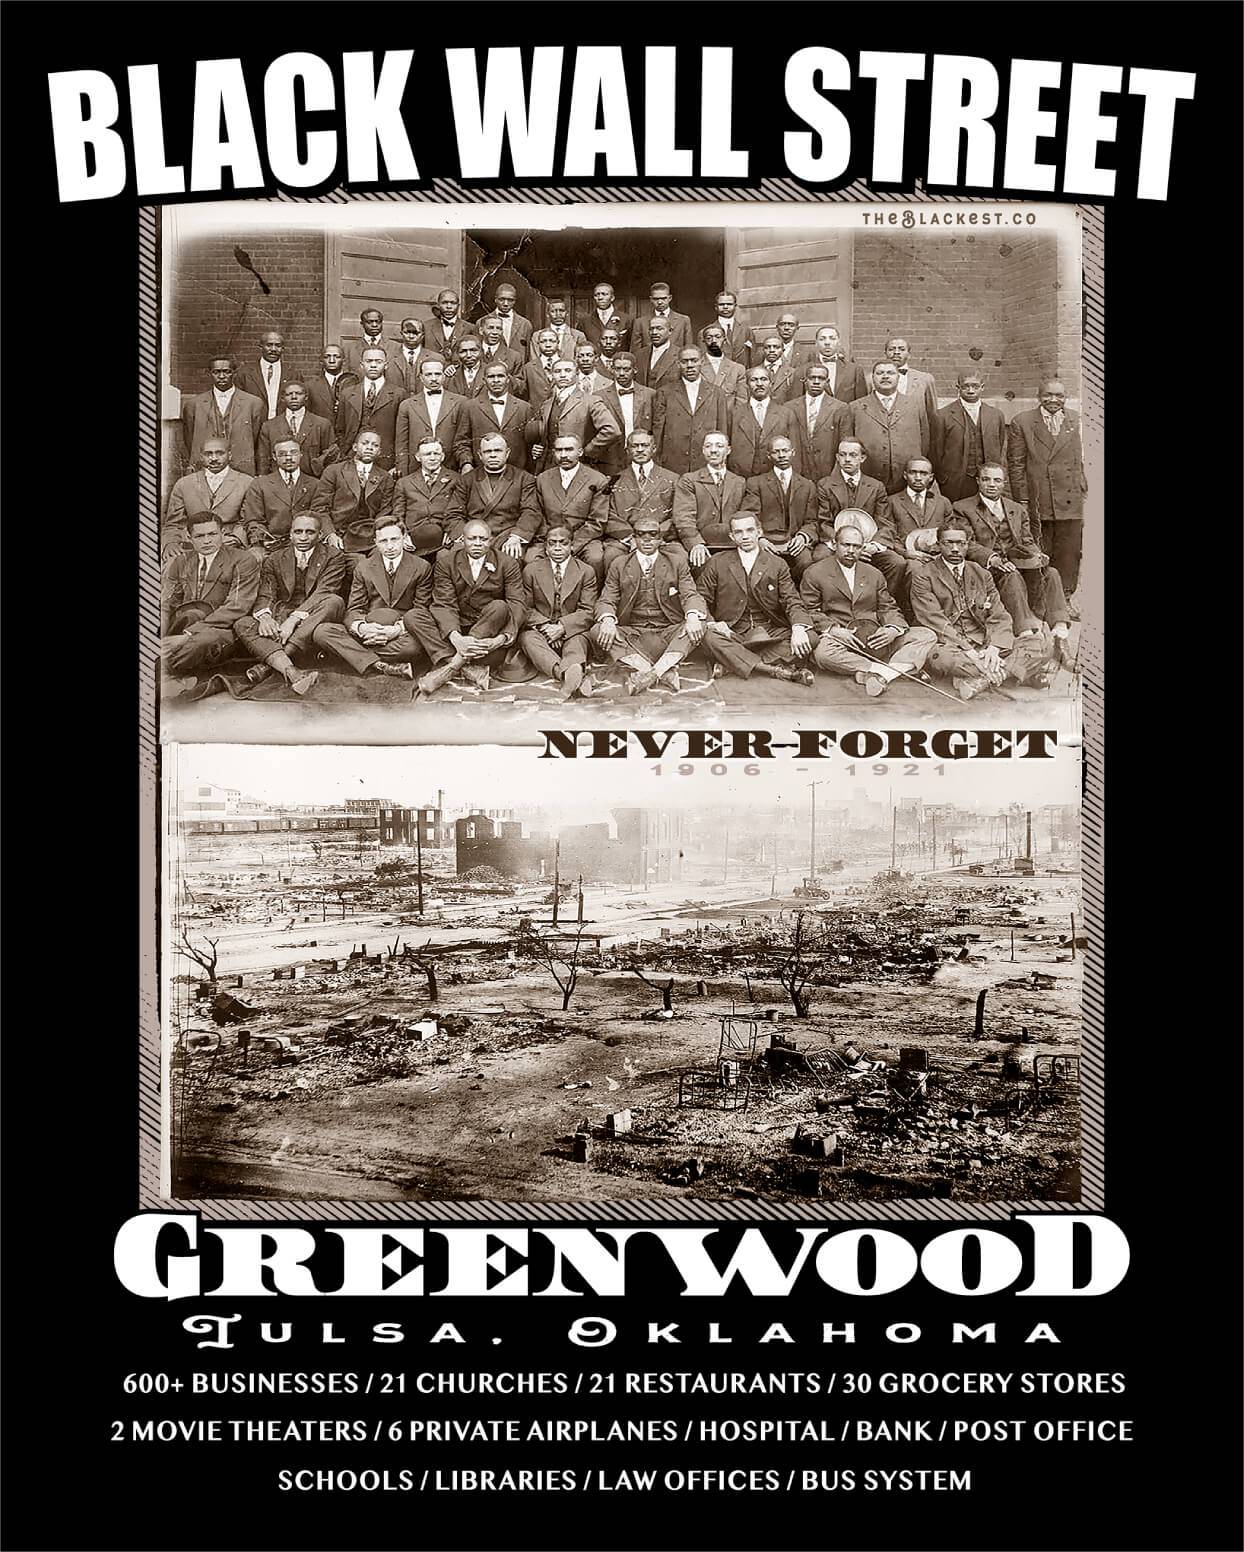 close up of an apparel design that says Black Wall Street and Greenwood with a vintage image of Black Wall Street before and after 1921